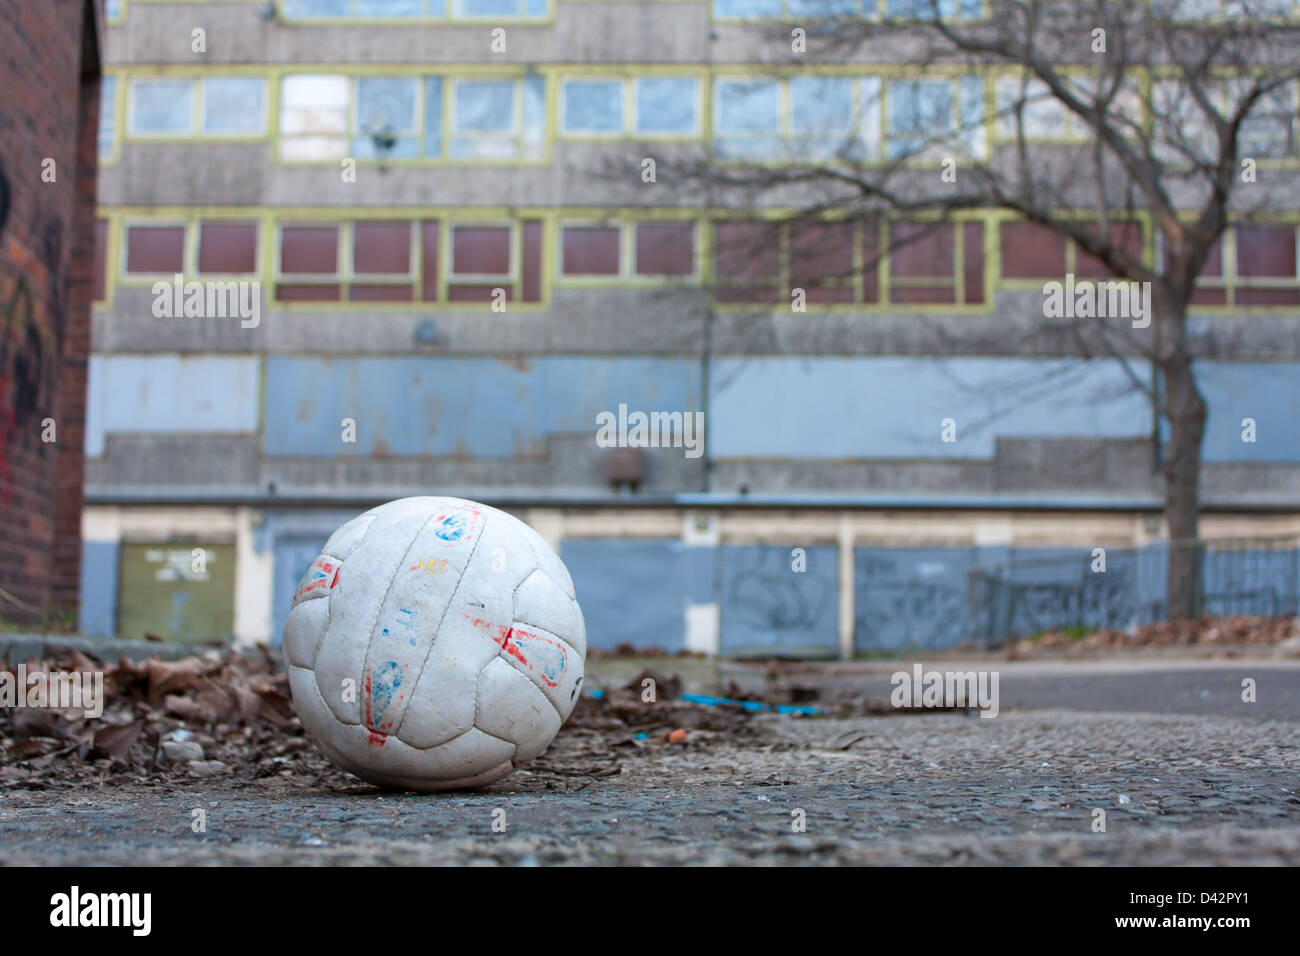 An abandoned football amid the condemned buildings of the Heygate Estate Stock Photo